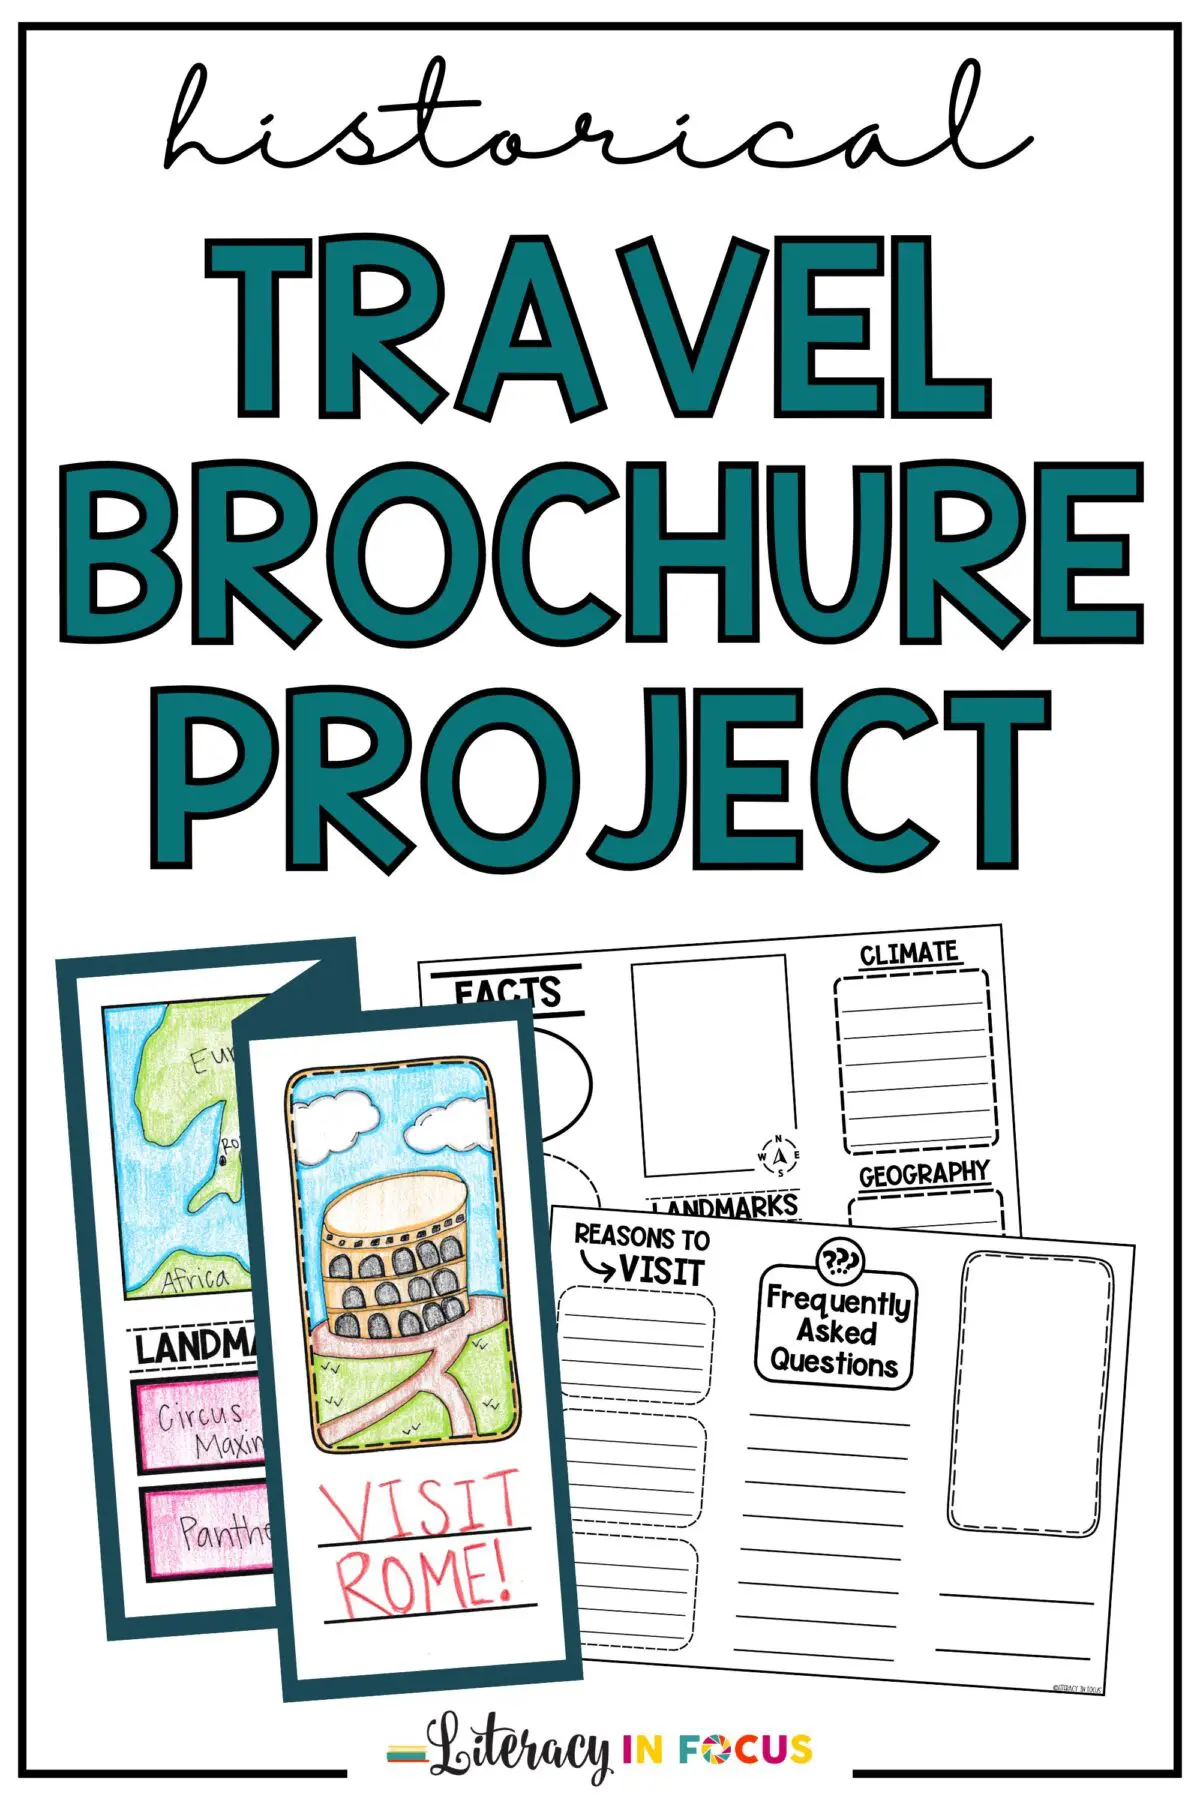 Travel Brochure Project for Kids